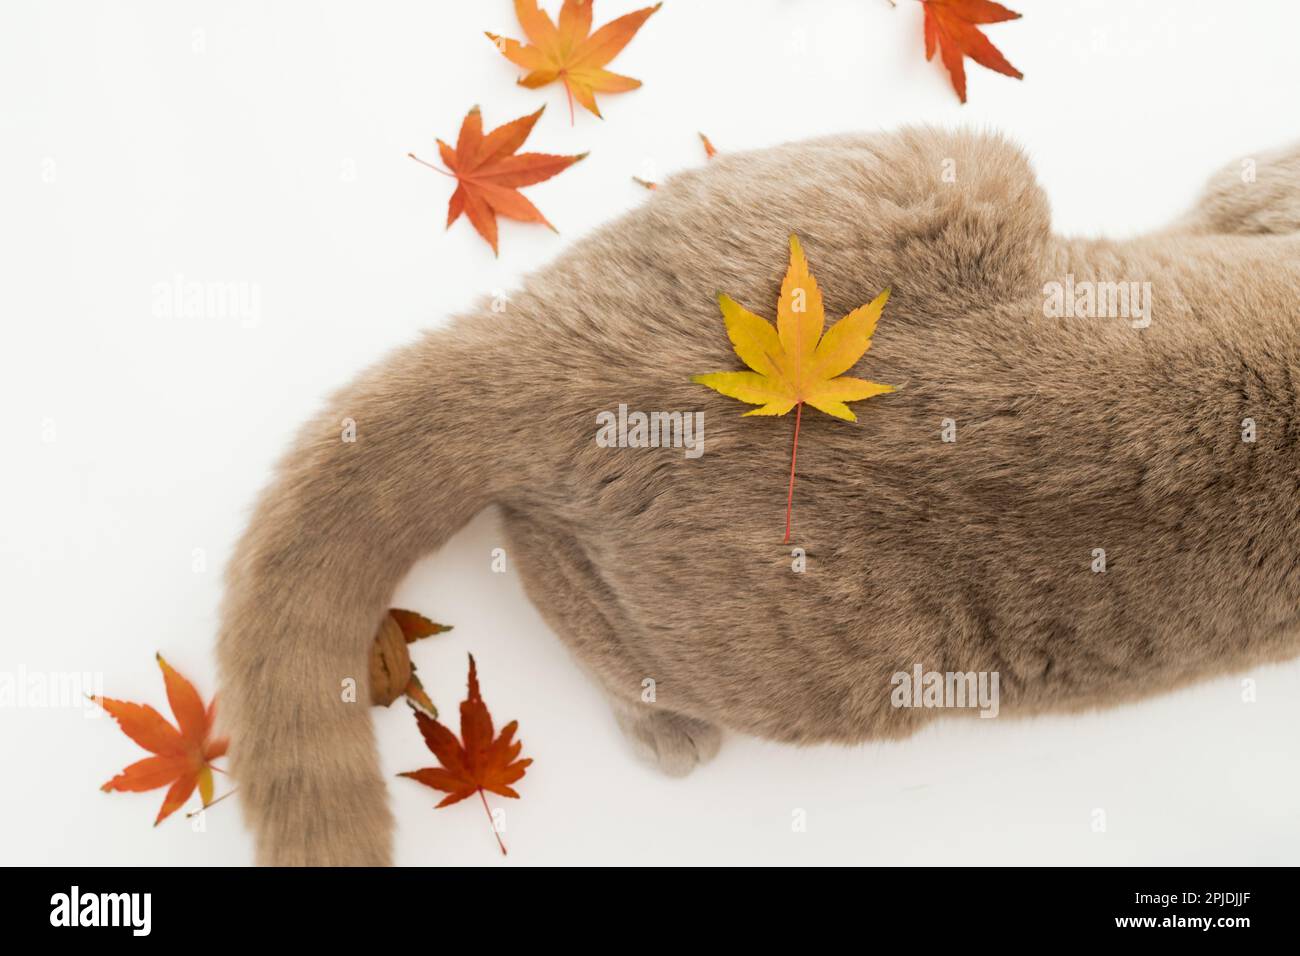 Cats tail on white background. Scottish cat with autumnal maple leaves Stock Photo